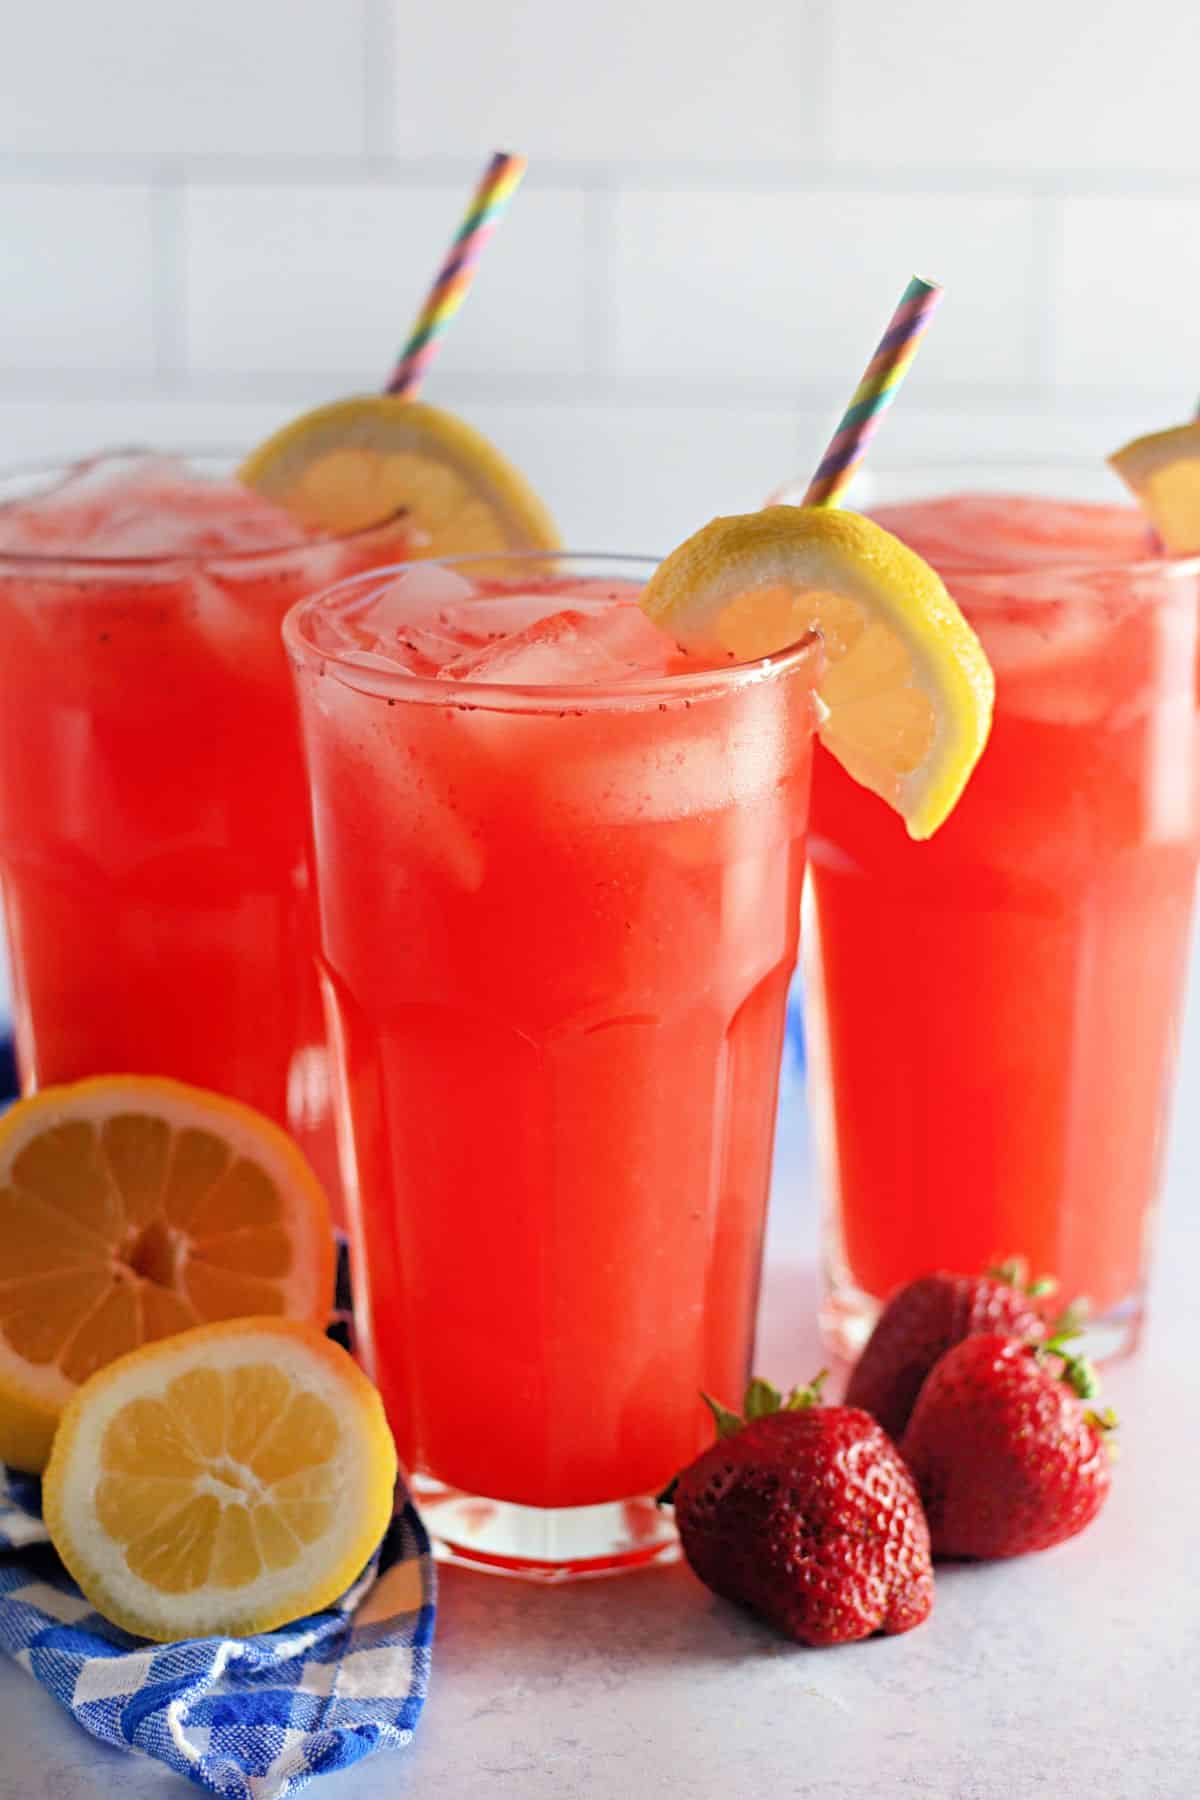 3 glasses of strawberry lemonade in clear glasses with straws.